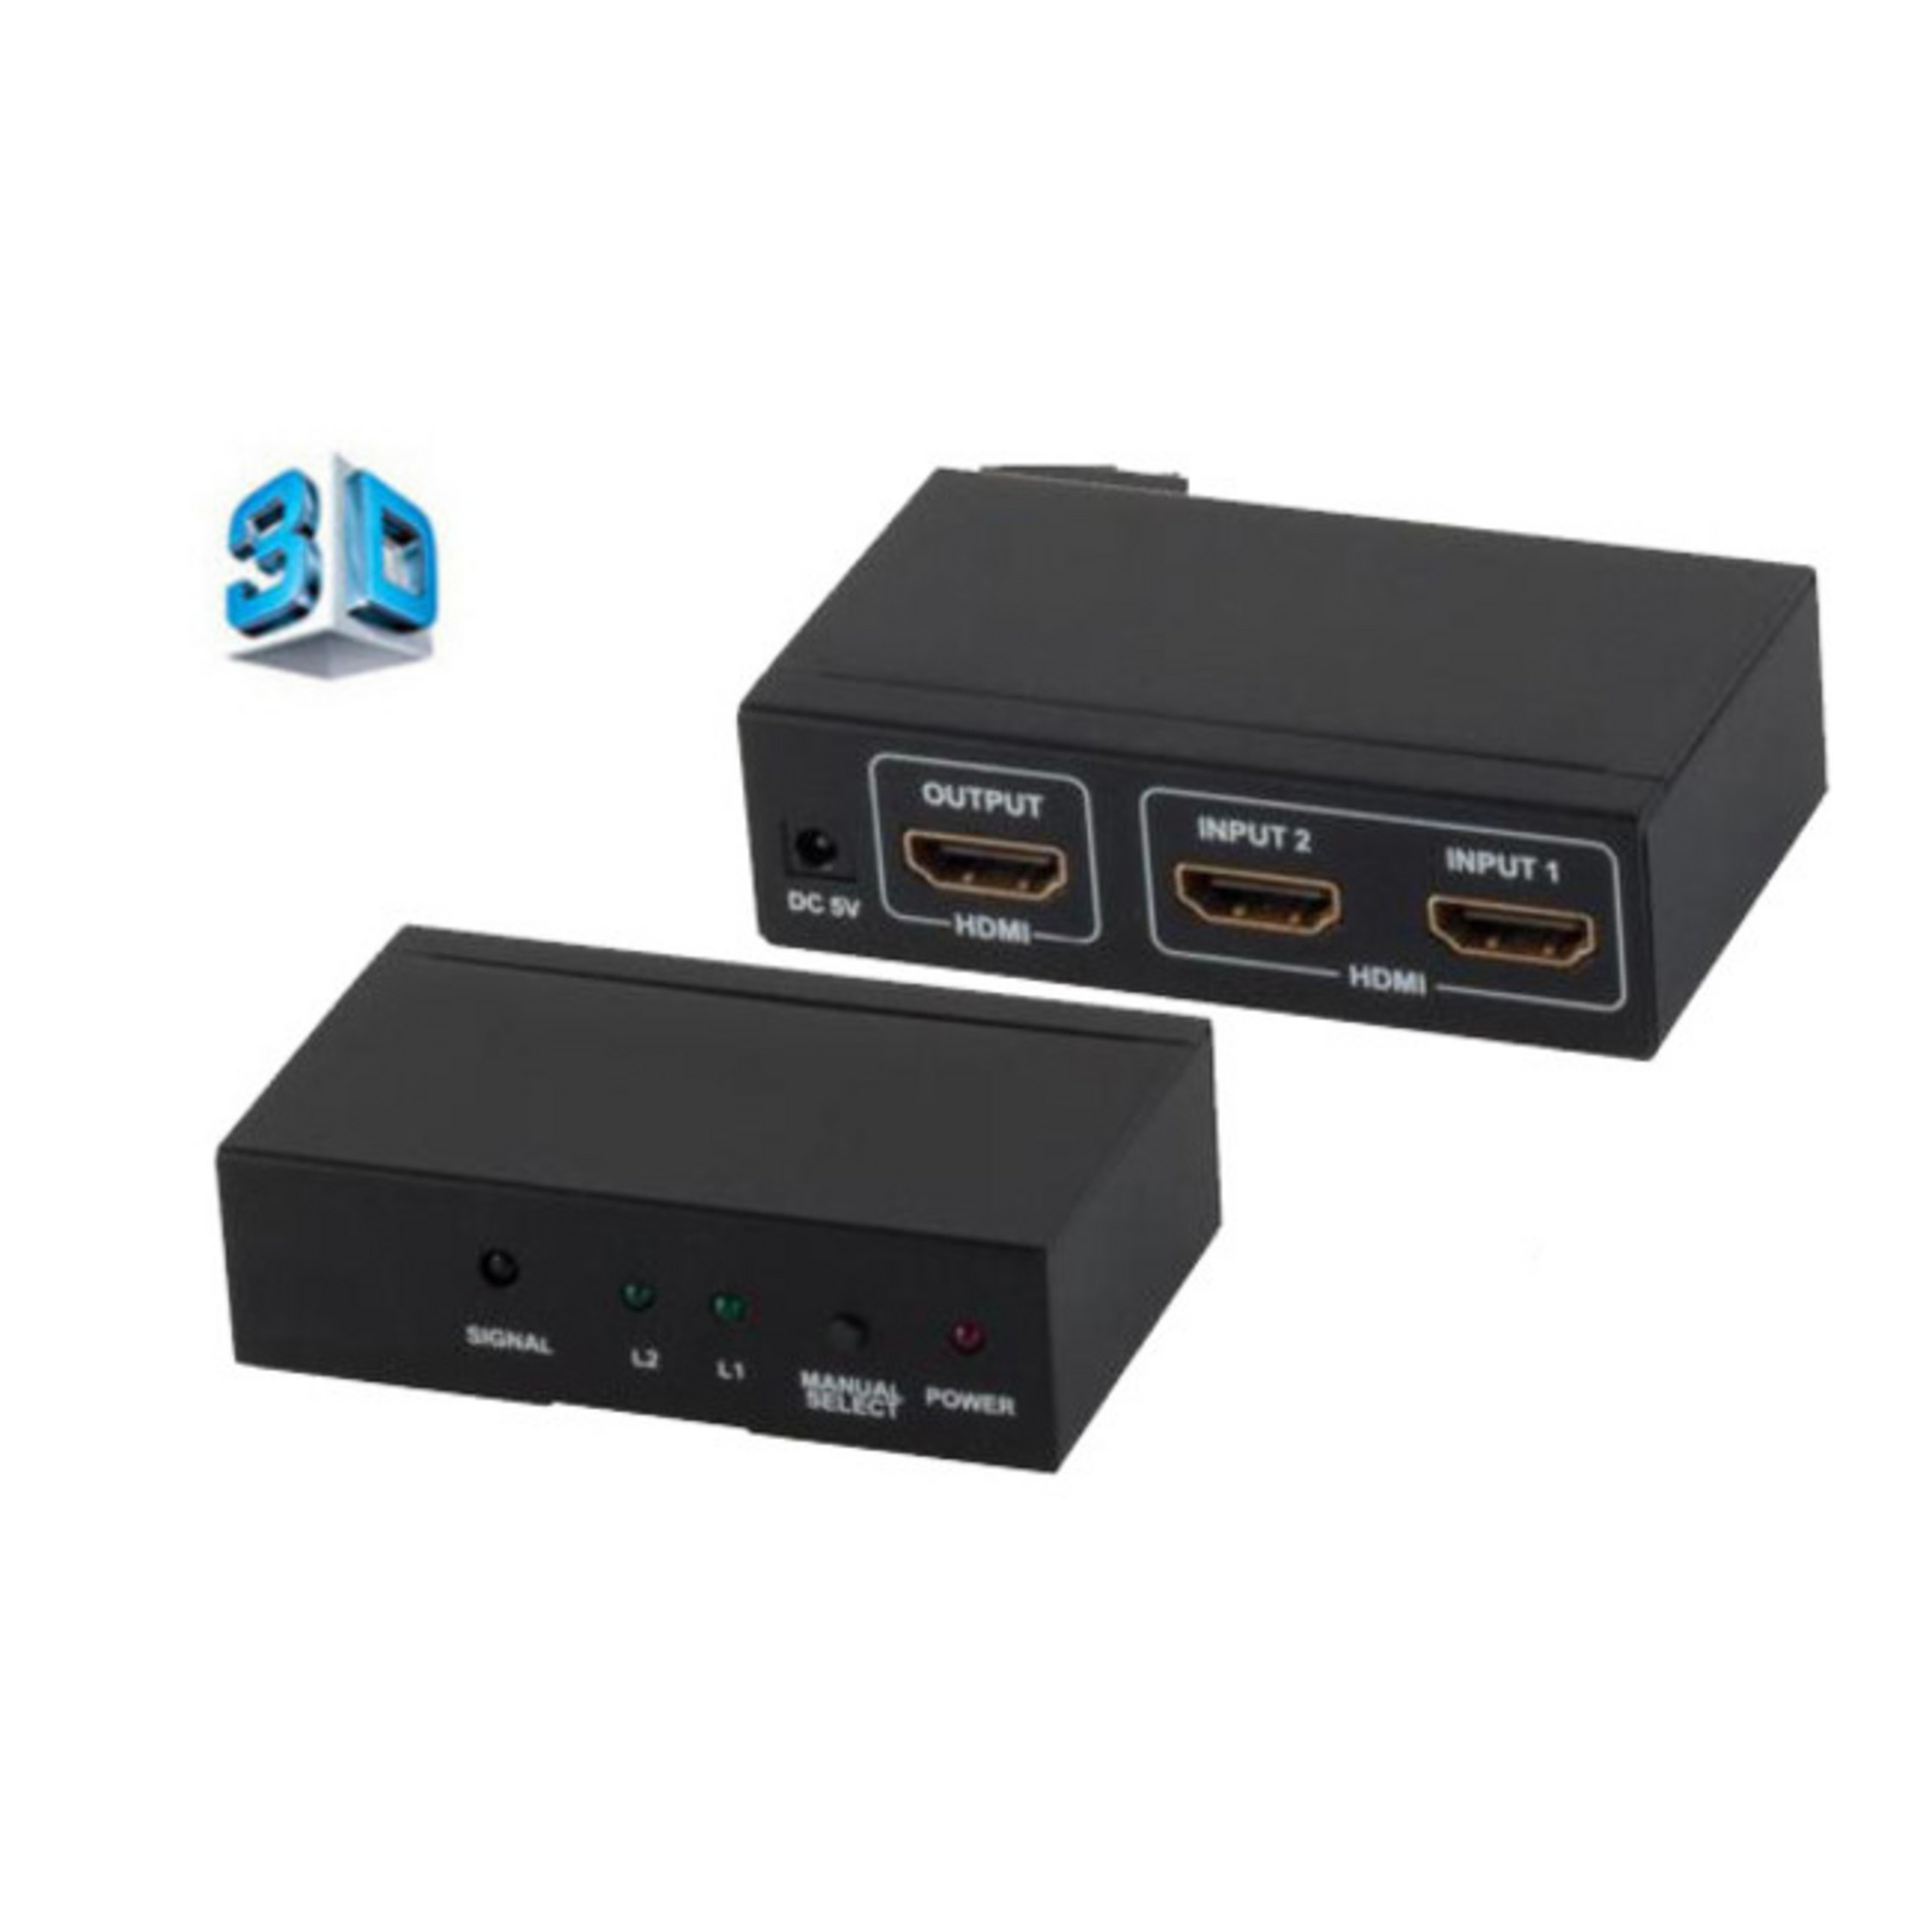 SHIVERPEAKS HDMI Switch, 2x IN 4K2K, OUT, HDMI VER1.4, 1x Switch 3D